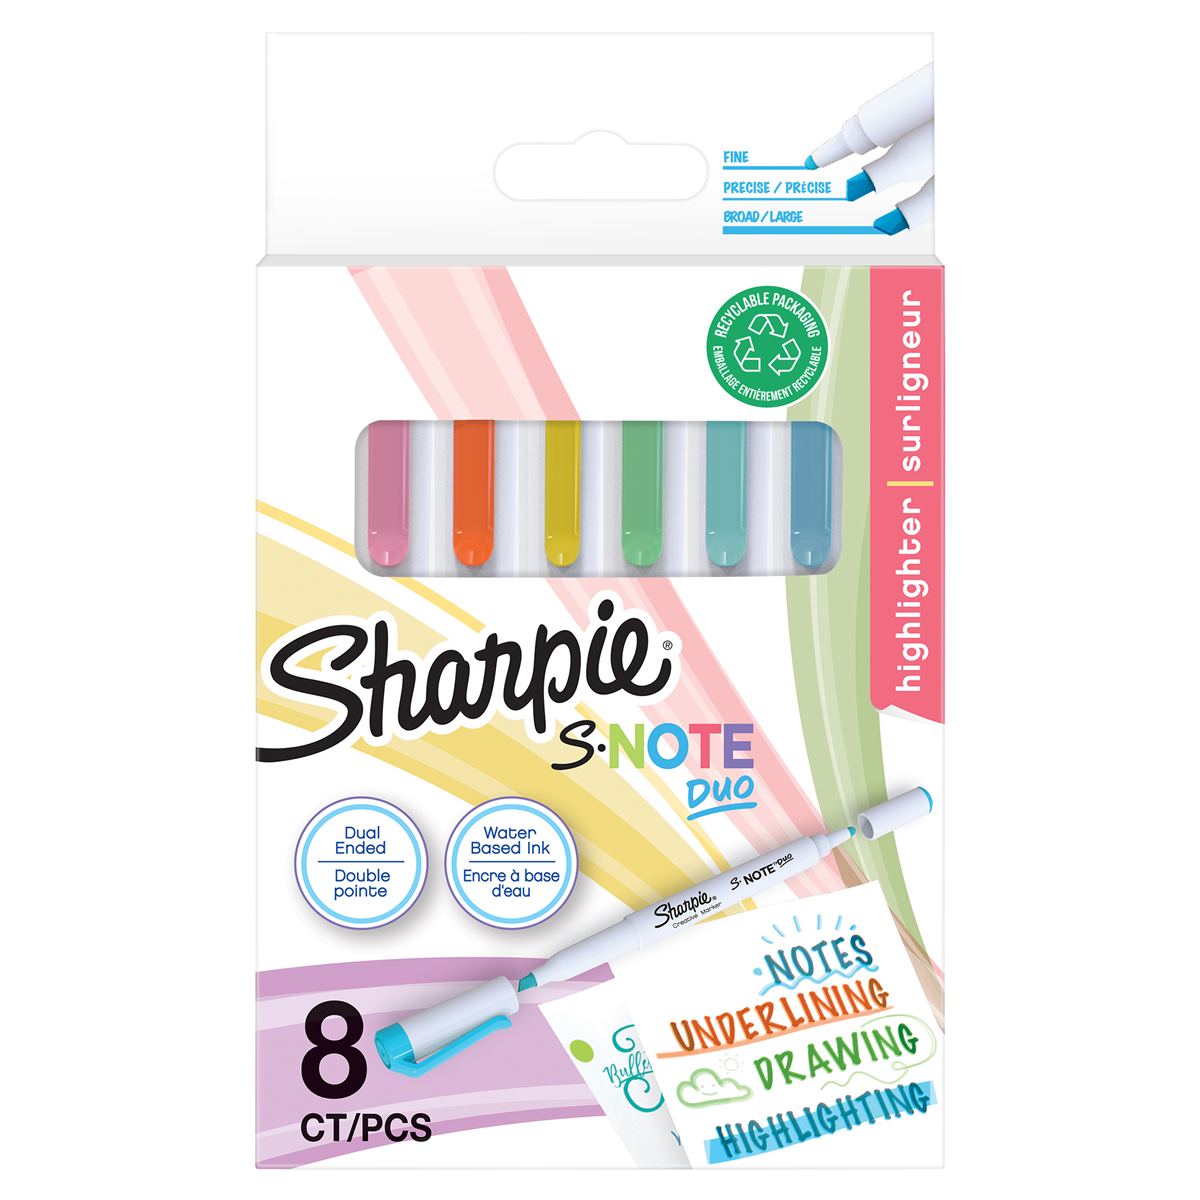 Sharpie S-Note Duo Pastel Highlighters - Pack of 8